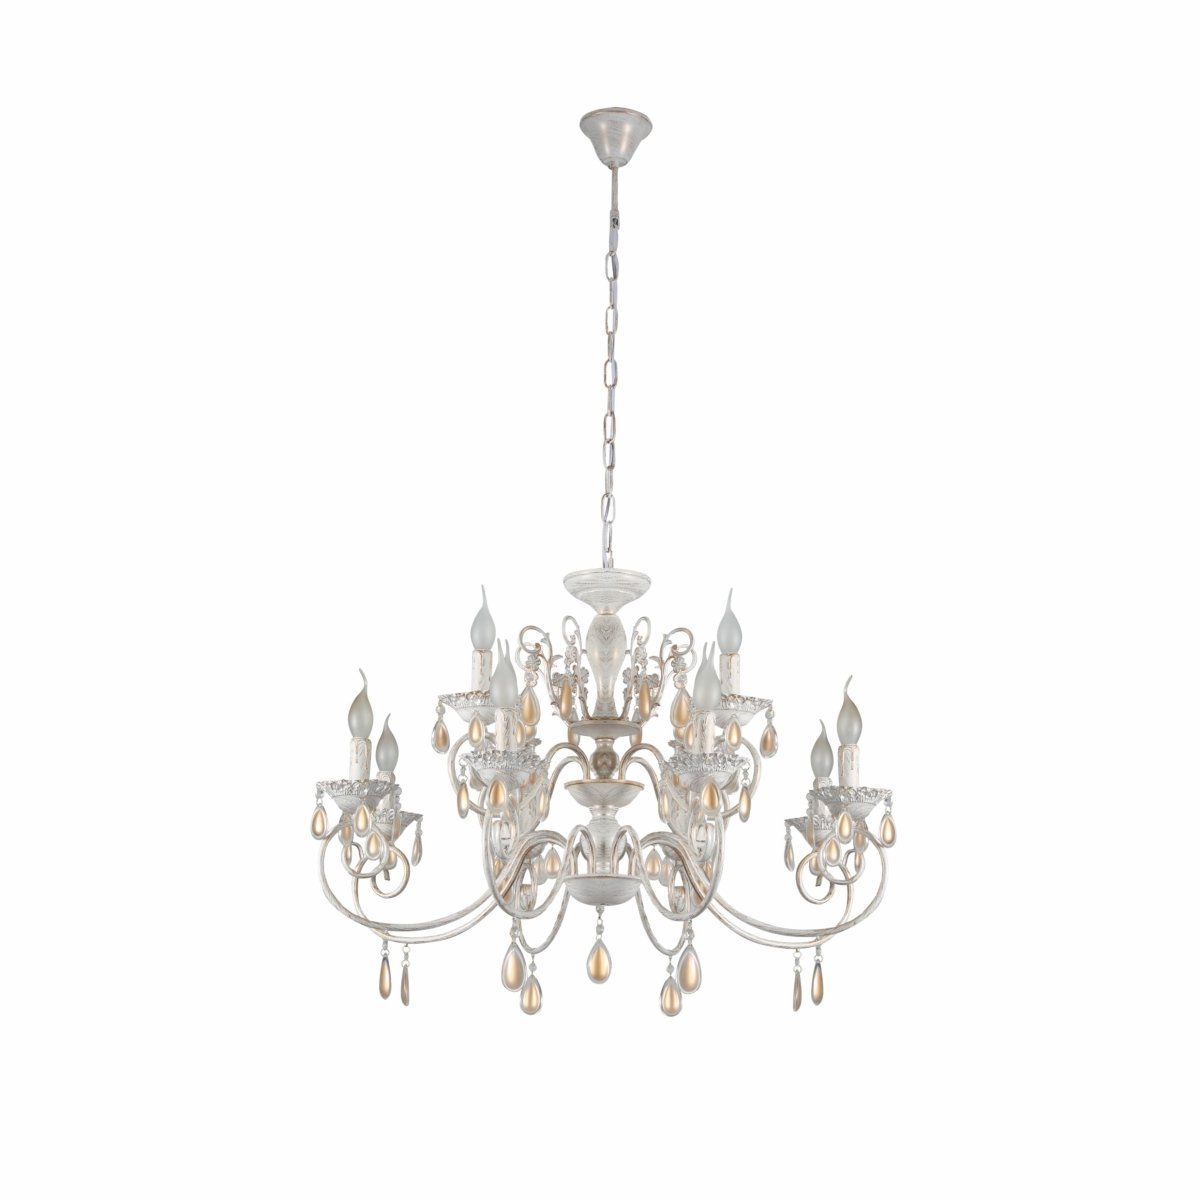 Main image of Amber Crystals Rice White with Gold Brushed Metal 12 Arm Chandelier with E14 Fitting | TEKLED 158-17854